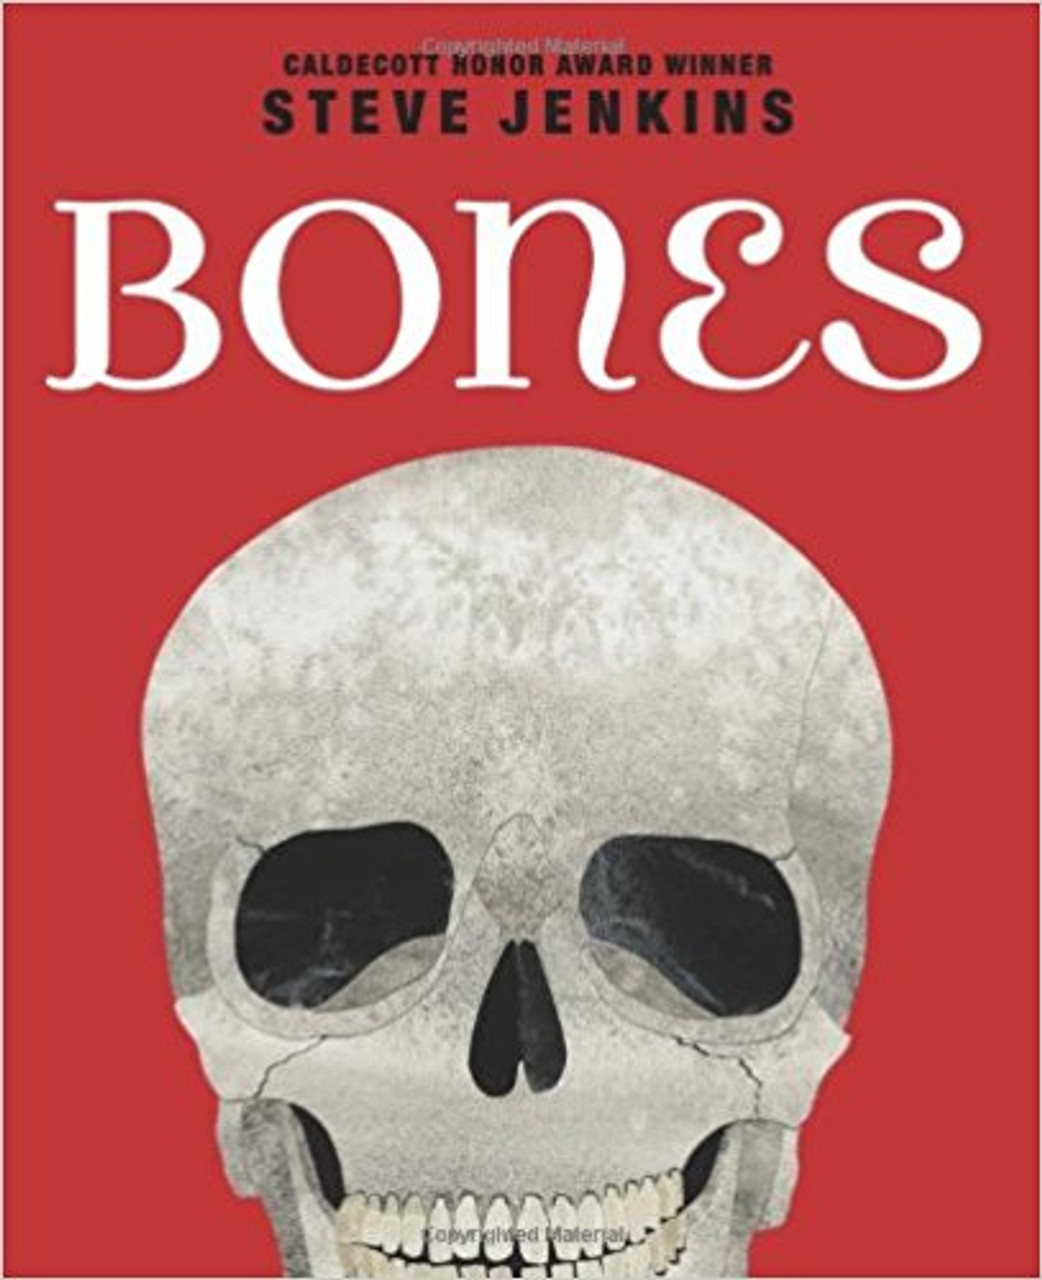 Kids come face to face with some head-to-toe boney comparisons, many of them shown at actual size. Includes three large gatefold spreads that reveal the hard (yet enjoyable) truths about the boney insides of Earth's many creatures. Full color.